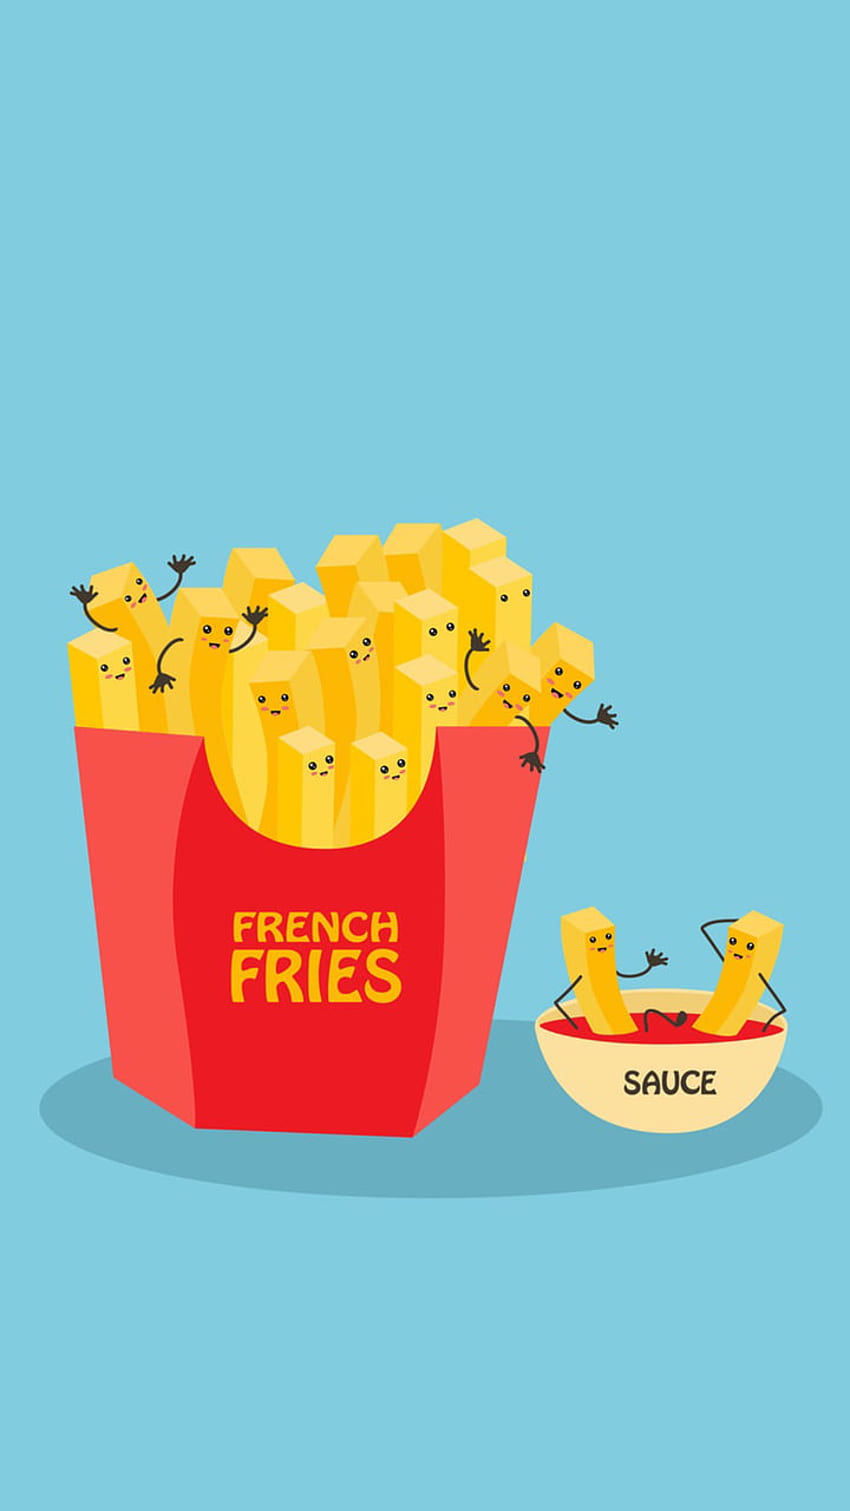 French Fries Background Images HD Pictures and Wallpaper For Free Download   Pngtree